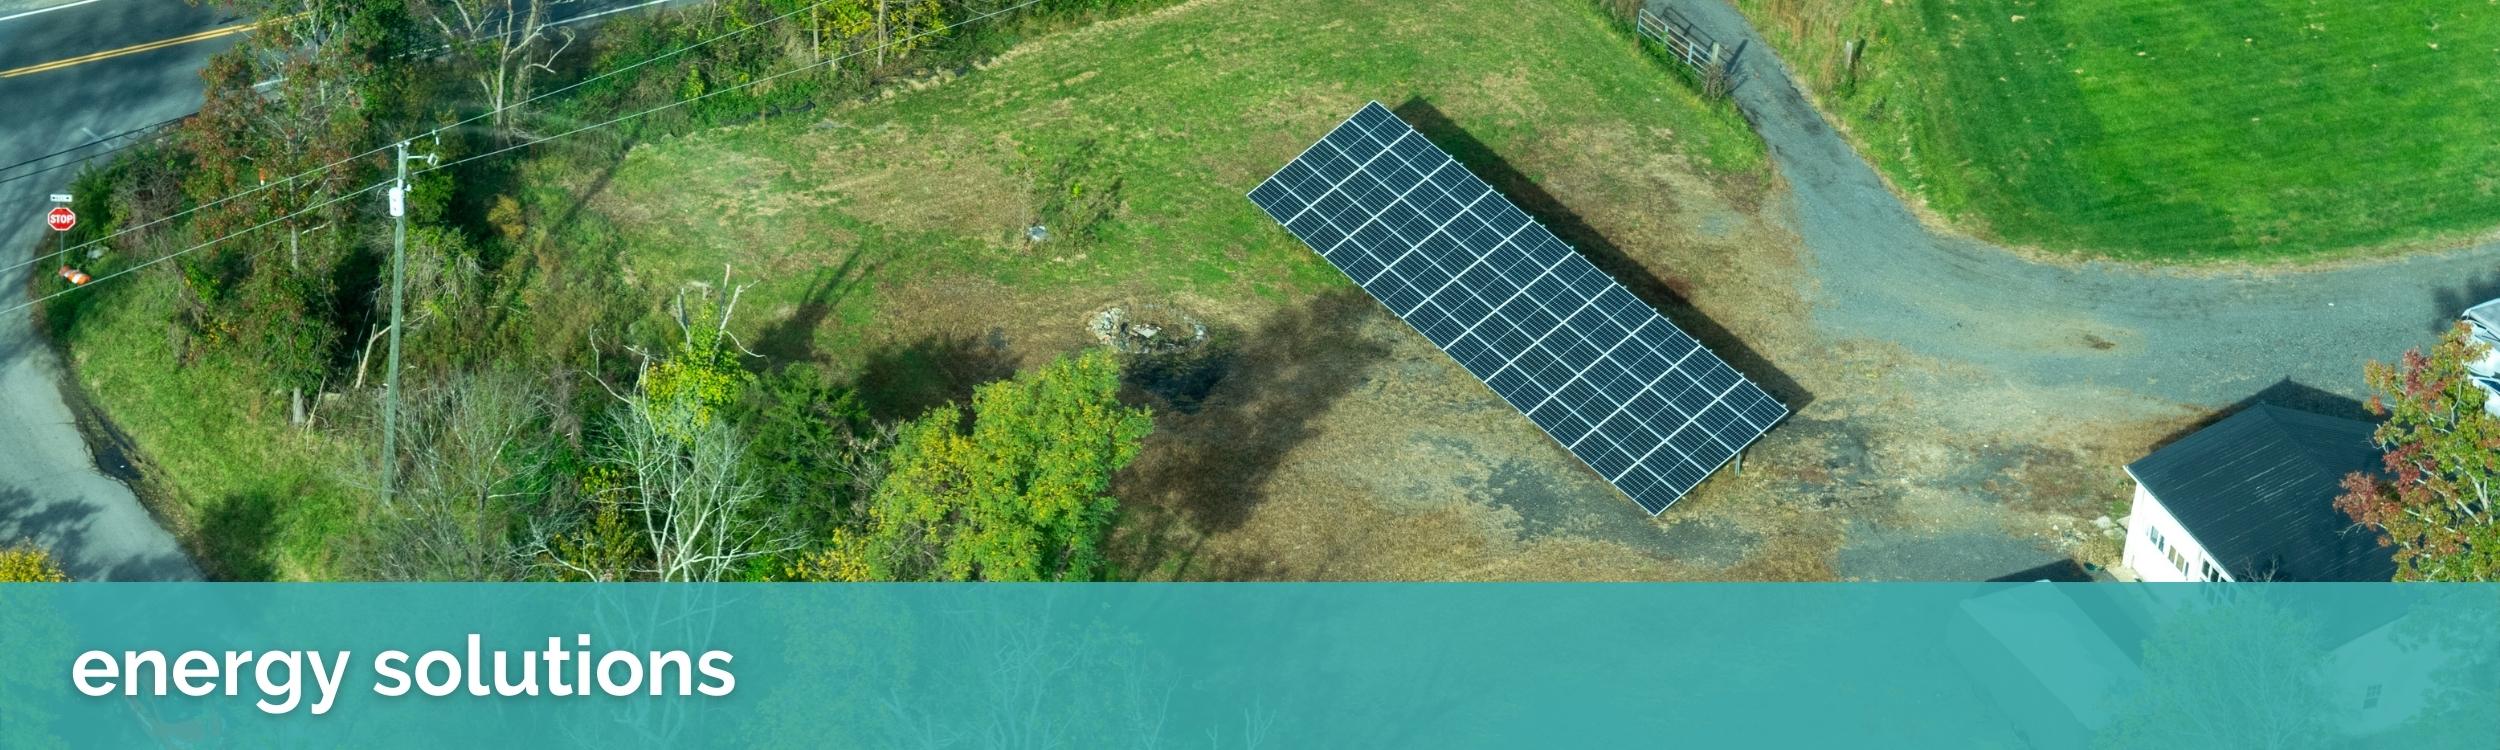 image banner of a residential solar array in a backyard with text that reads "energy solutions"